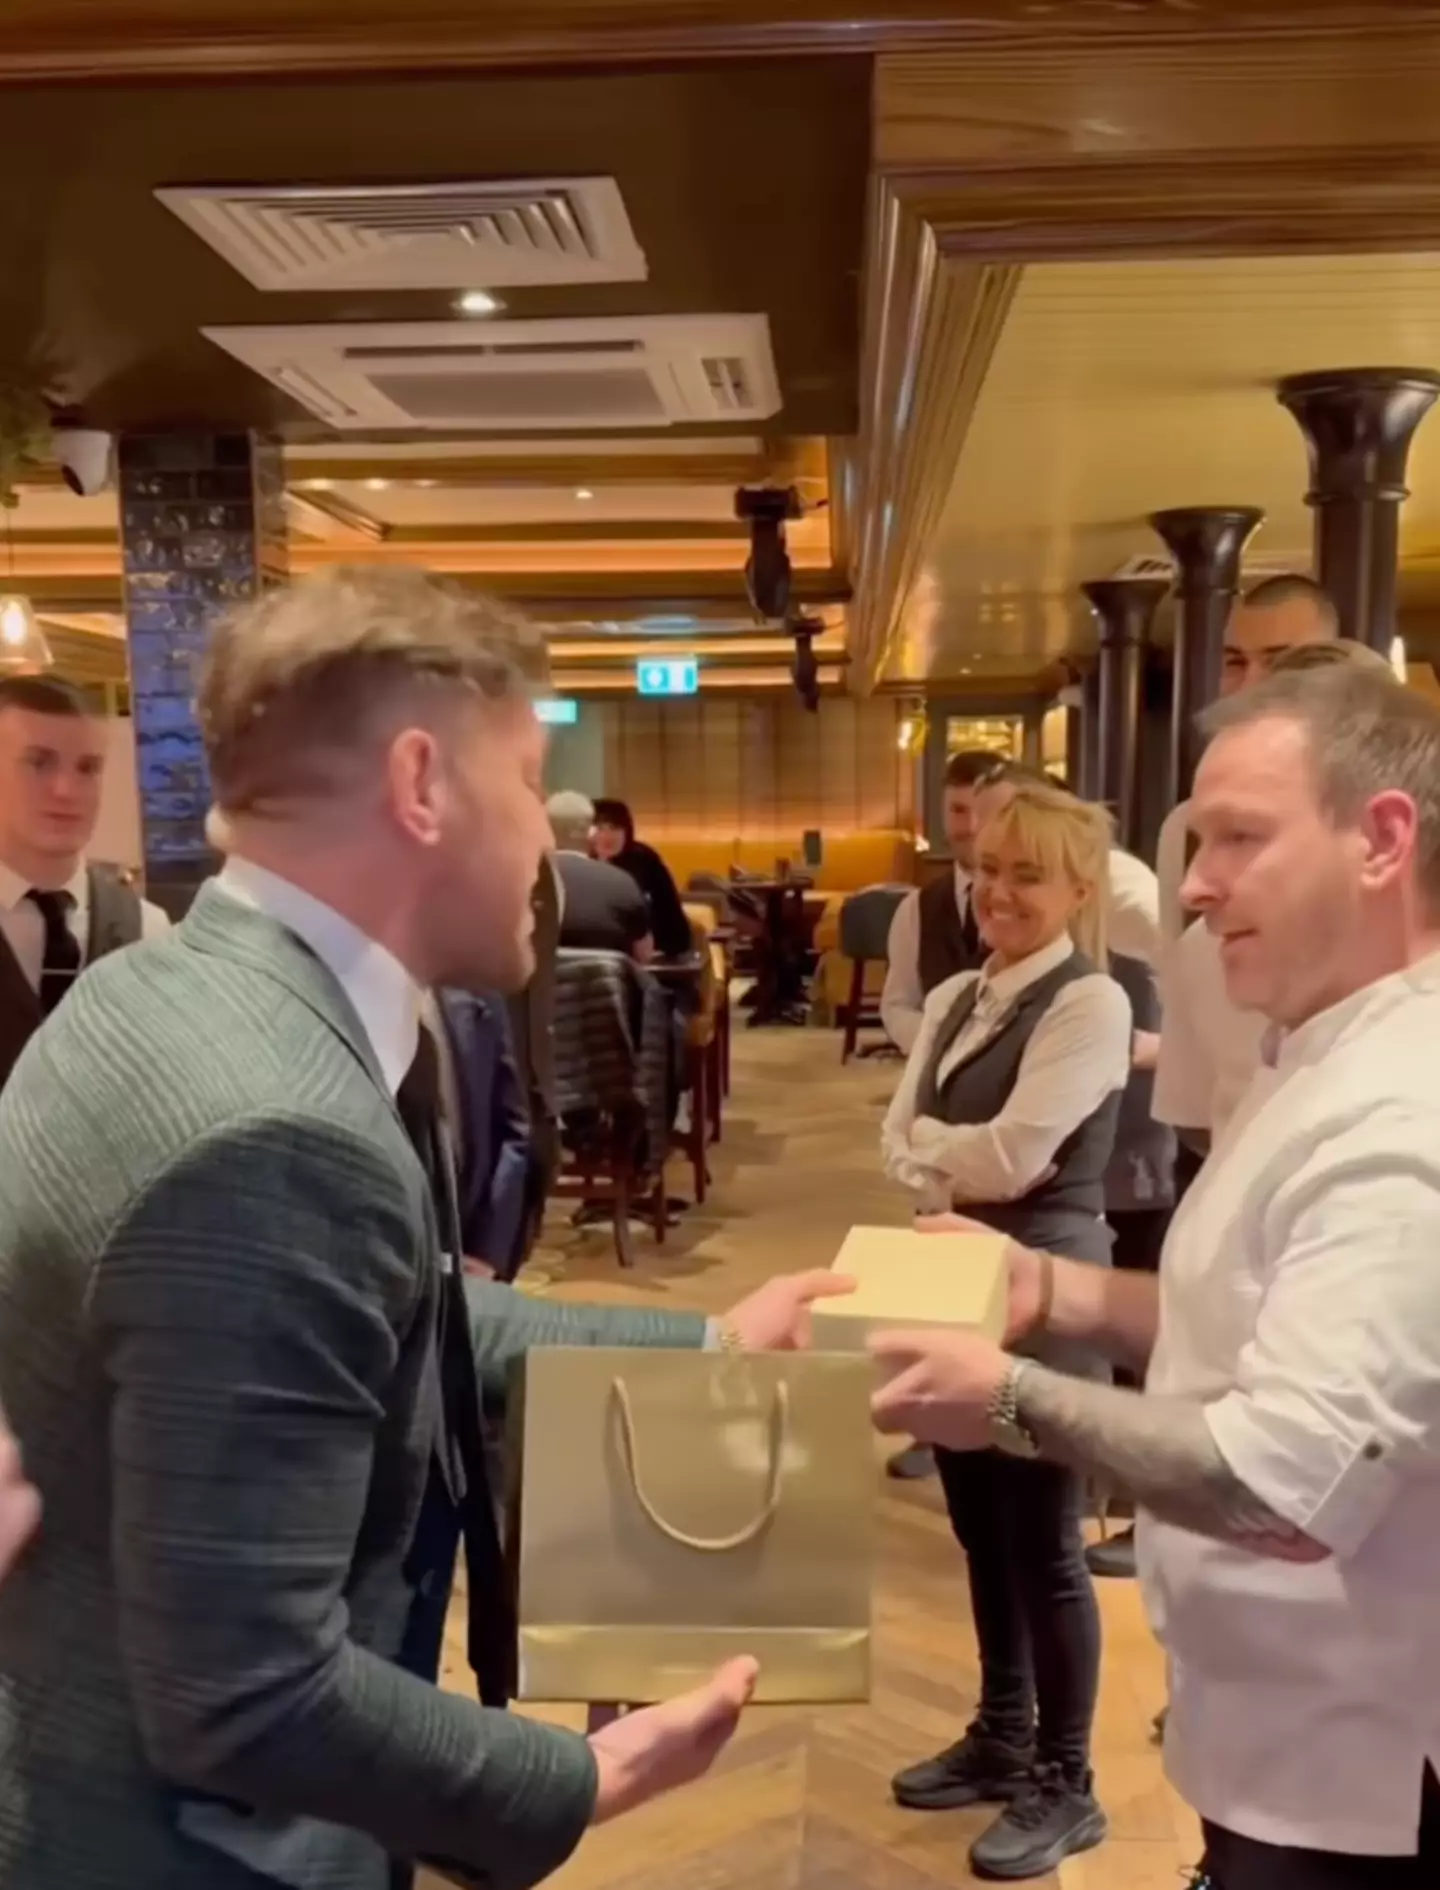 Conor McGregor gifted the employee a Rolex for their impressive achievement.